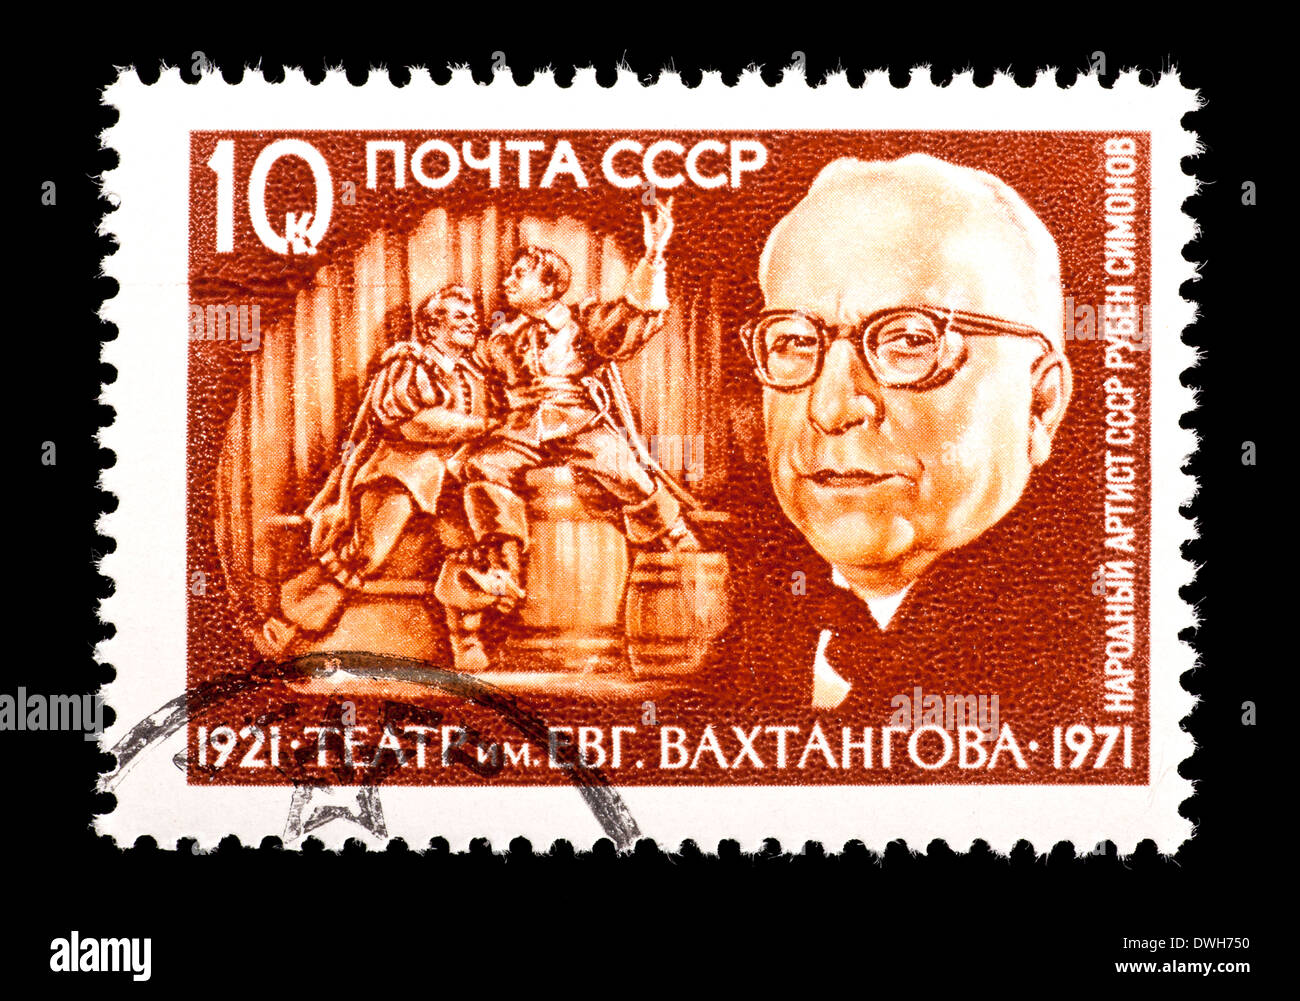 Postage stamp from the Soviet Union depicting Boris Shchukin and scene from 'Man with Rifle (Lenin)' for the Vakhtangov Theater Stock Photo